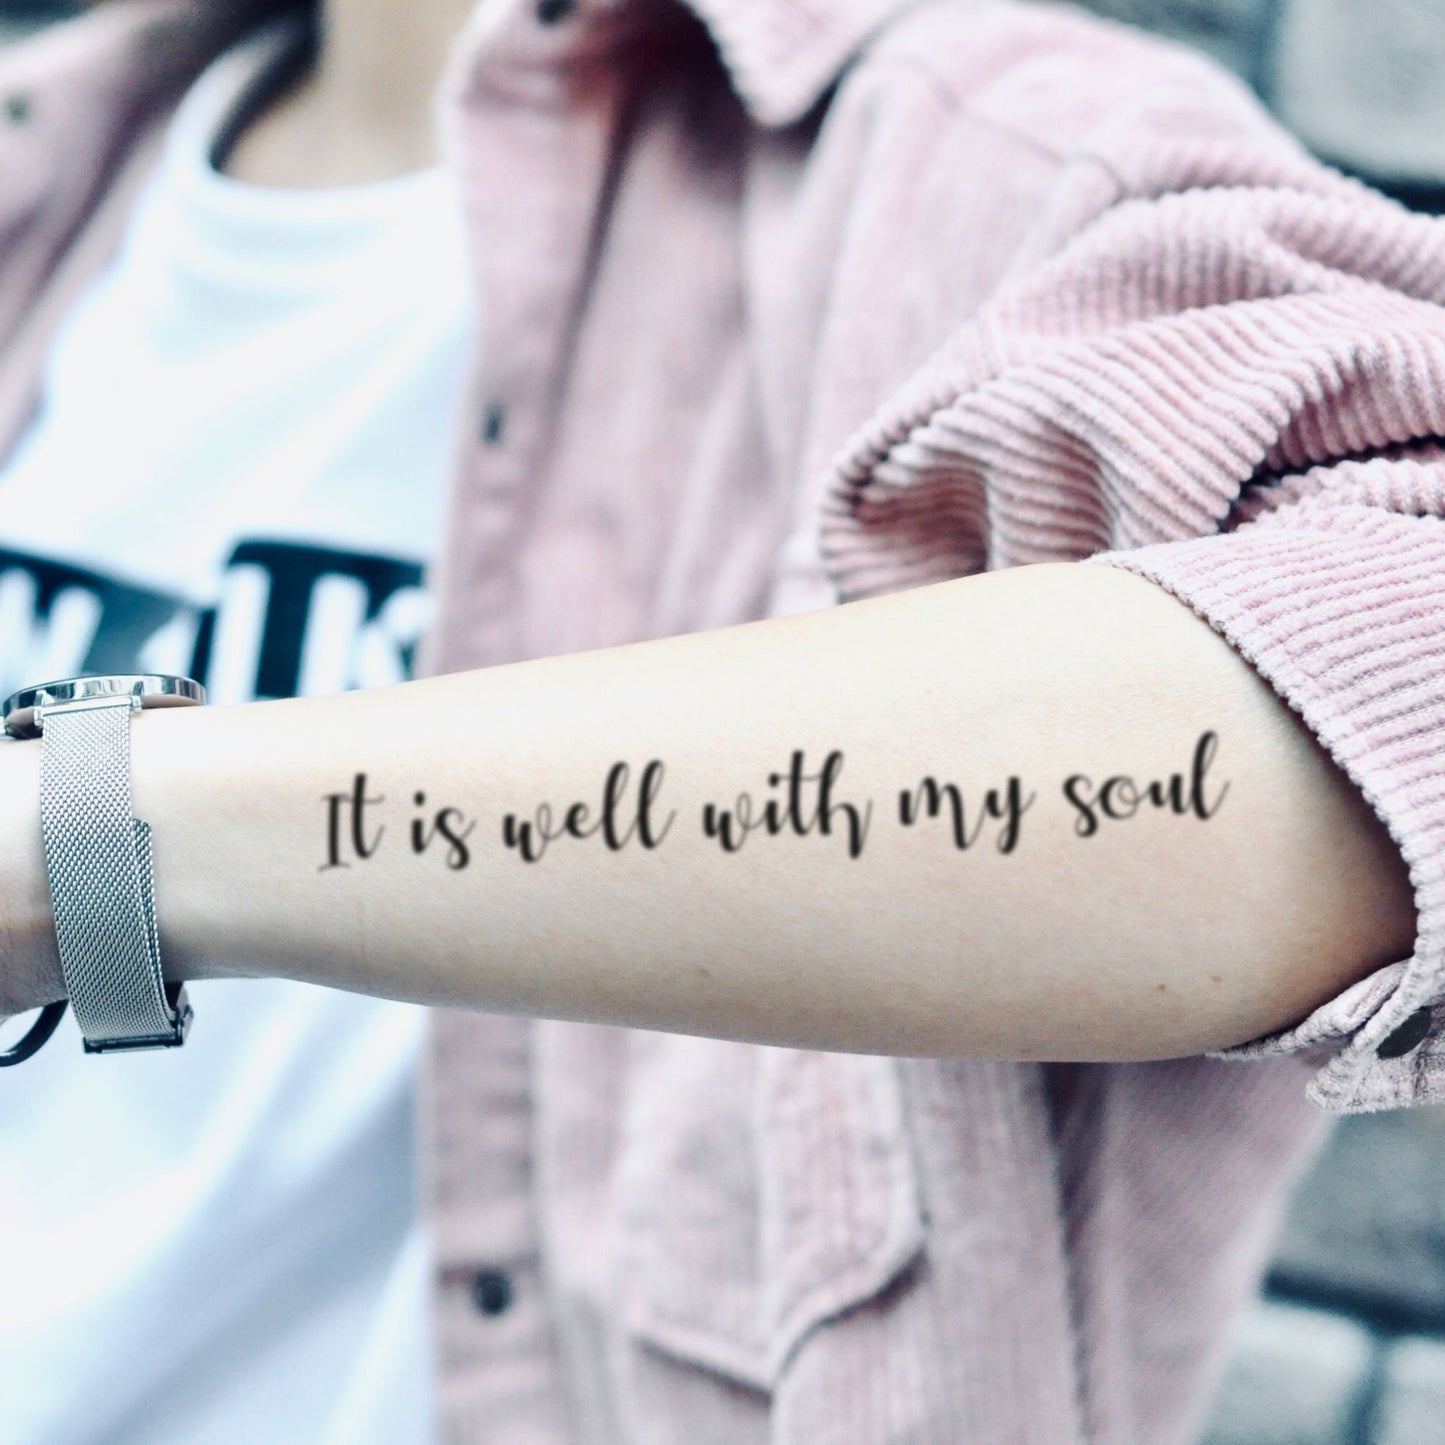 fake medium it is well with my soul lettering temporary tattoo sticker design idea on forearm